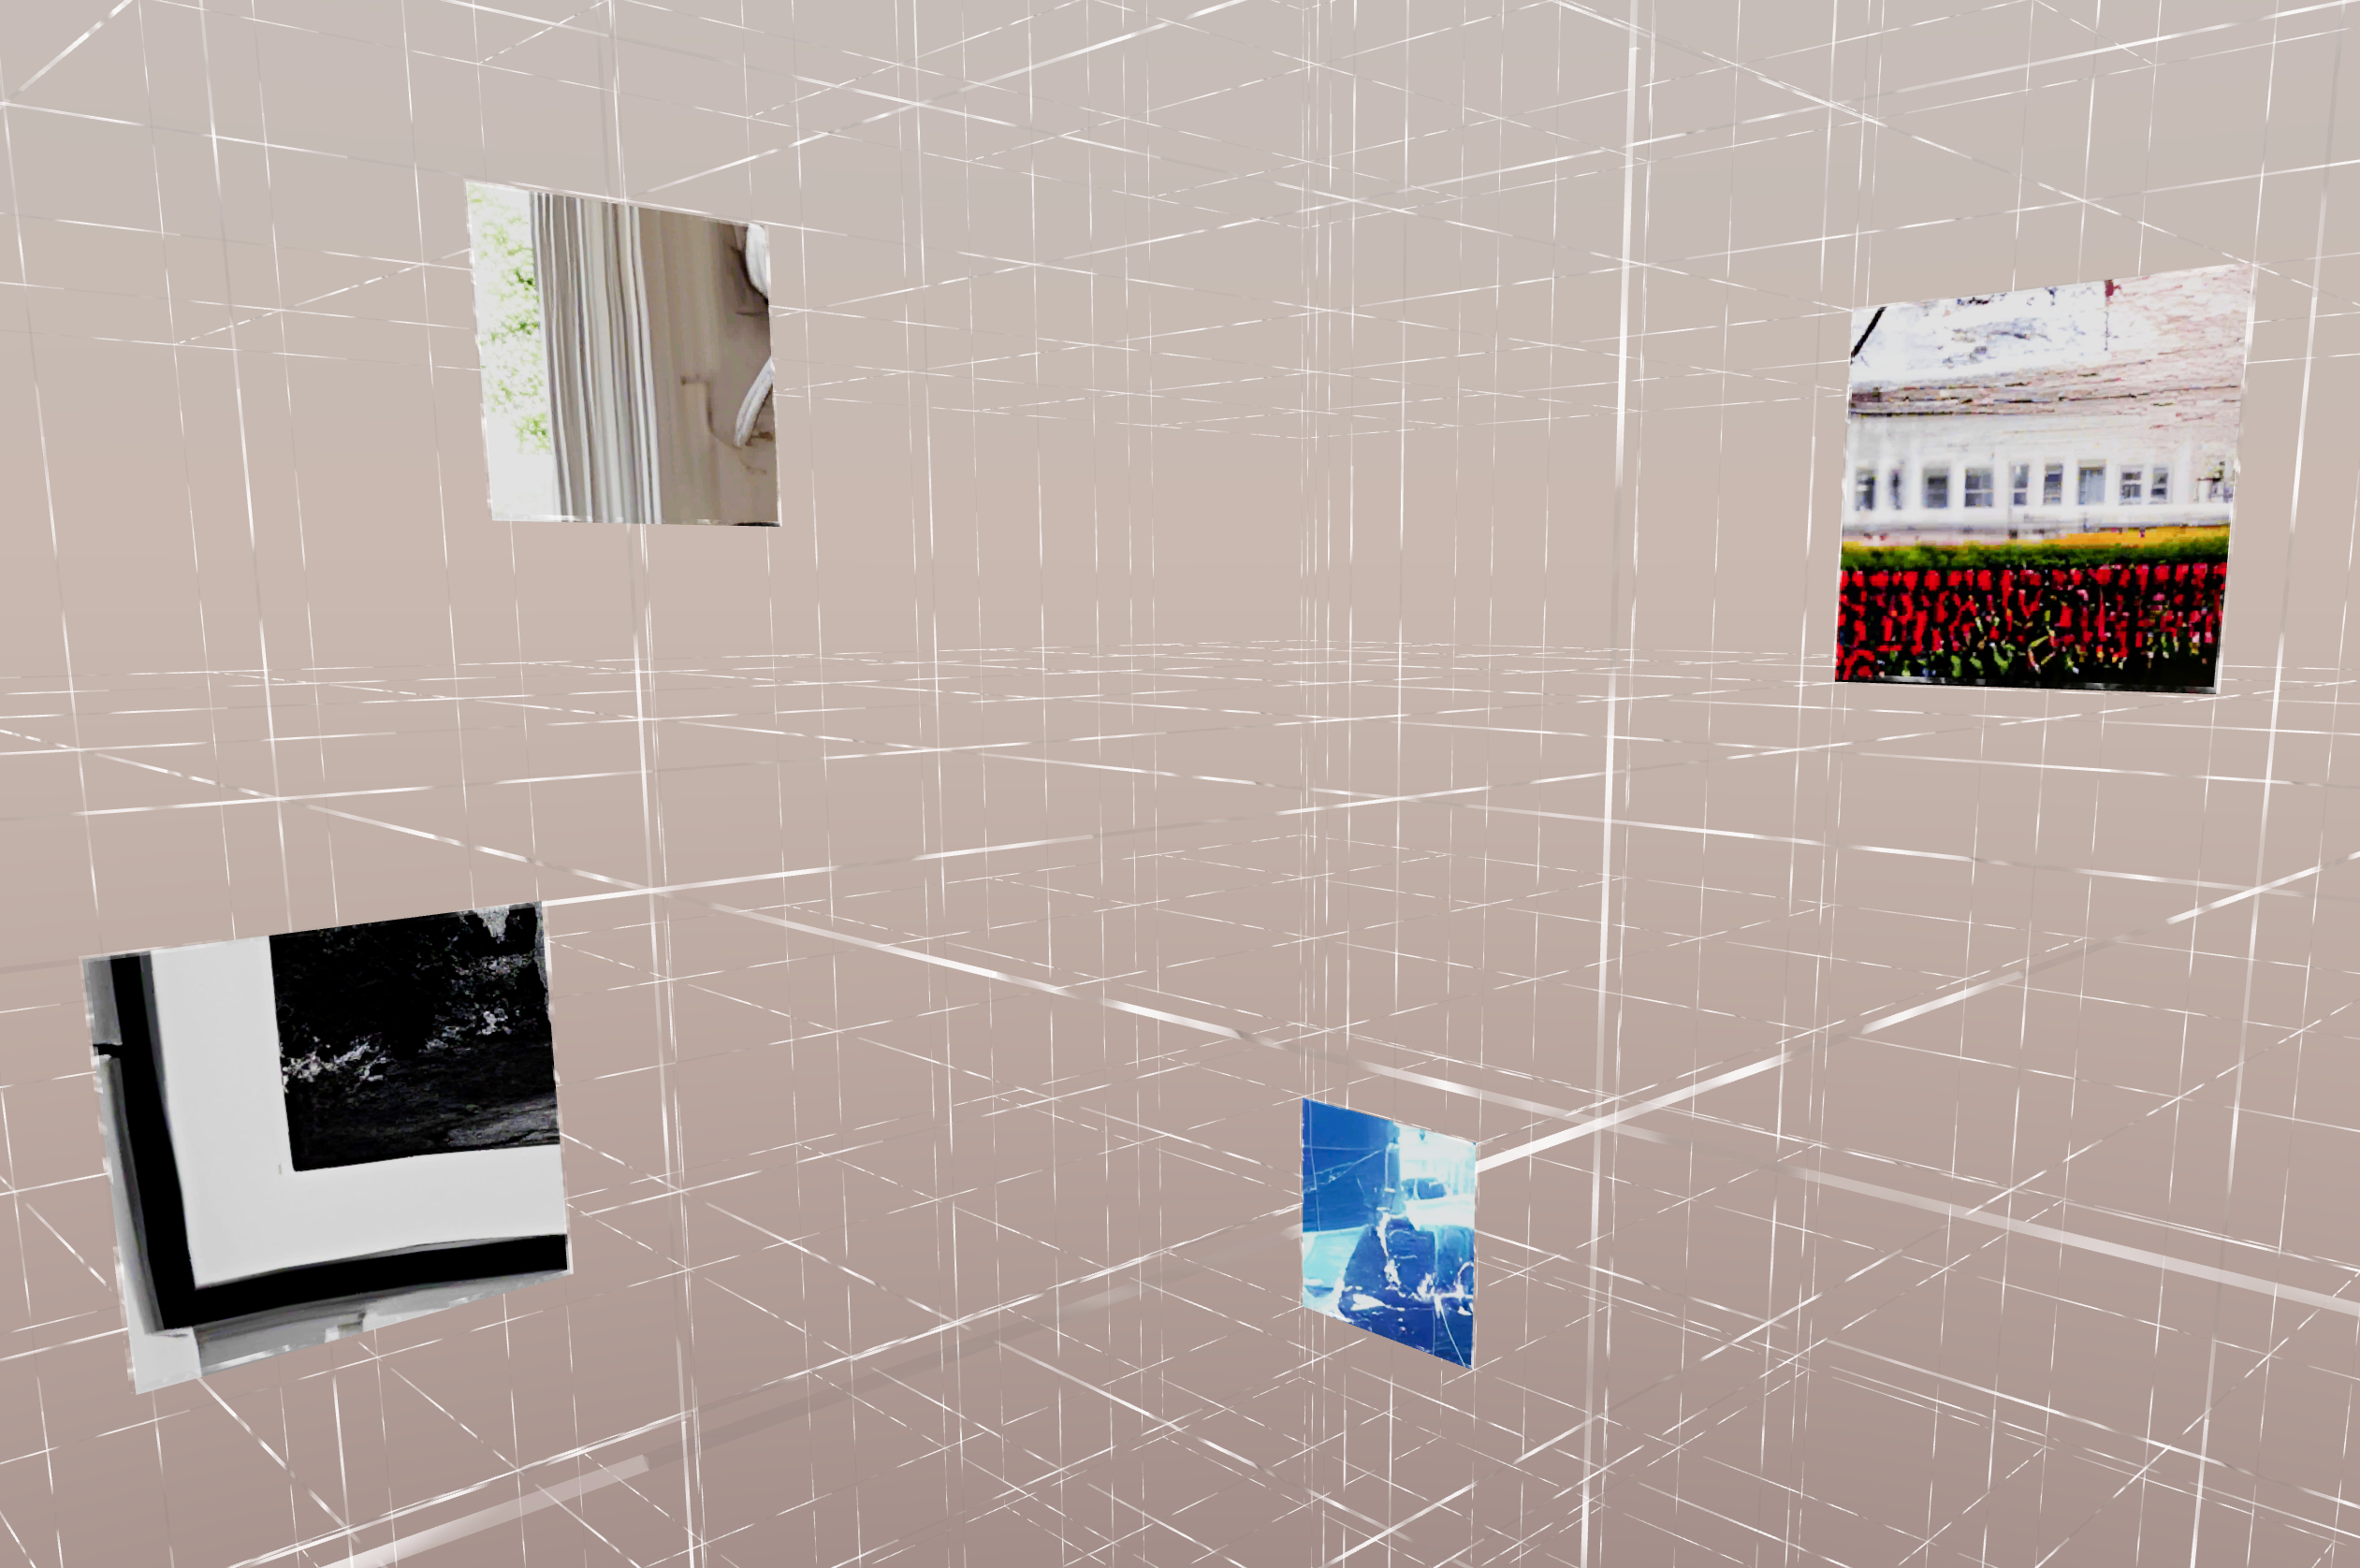 Reflections: A Digital Memory Living Lab in Chinatown